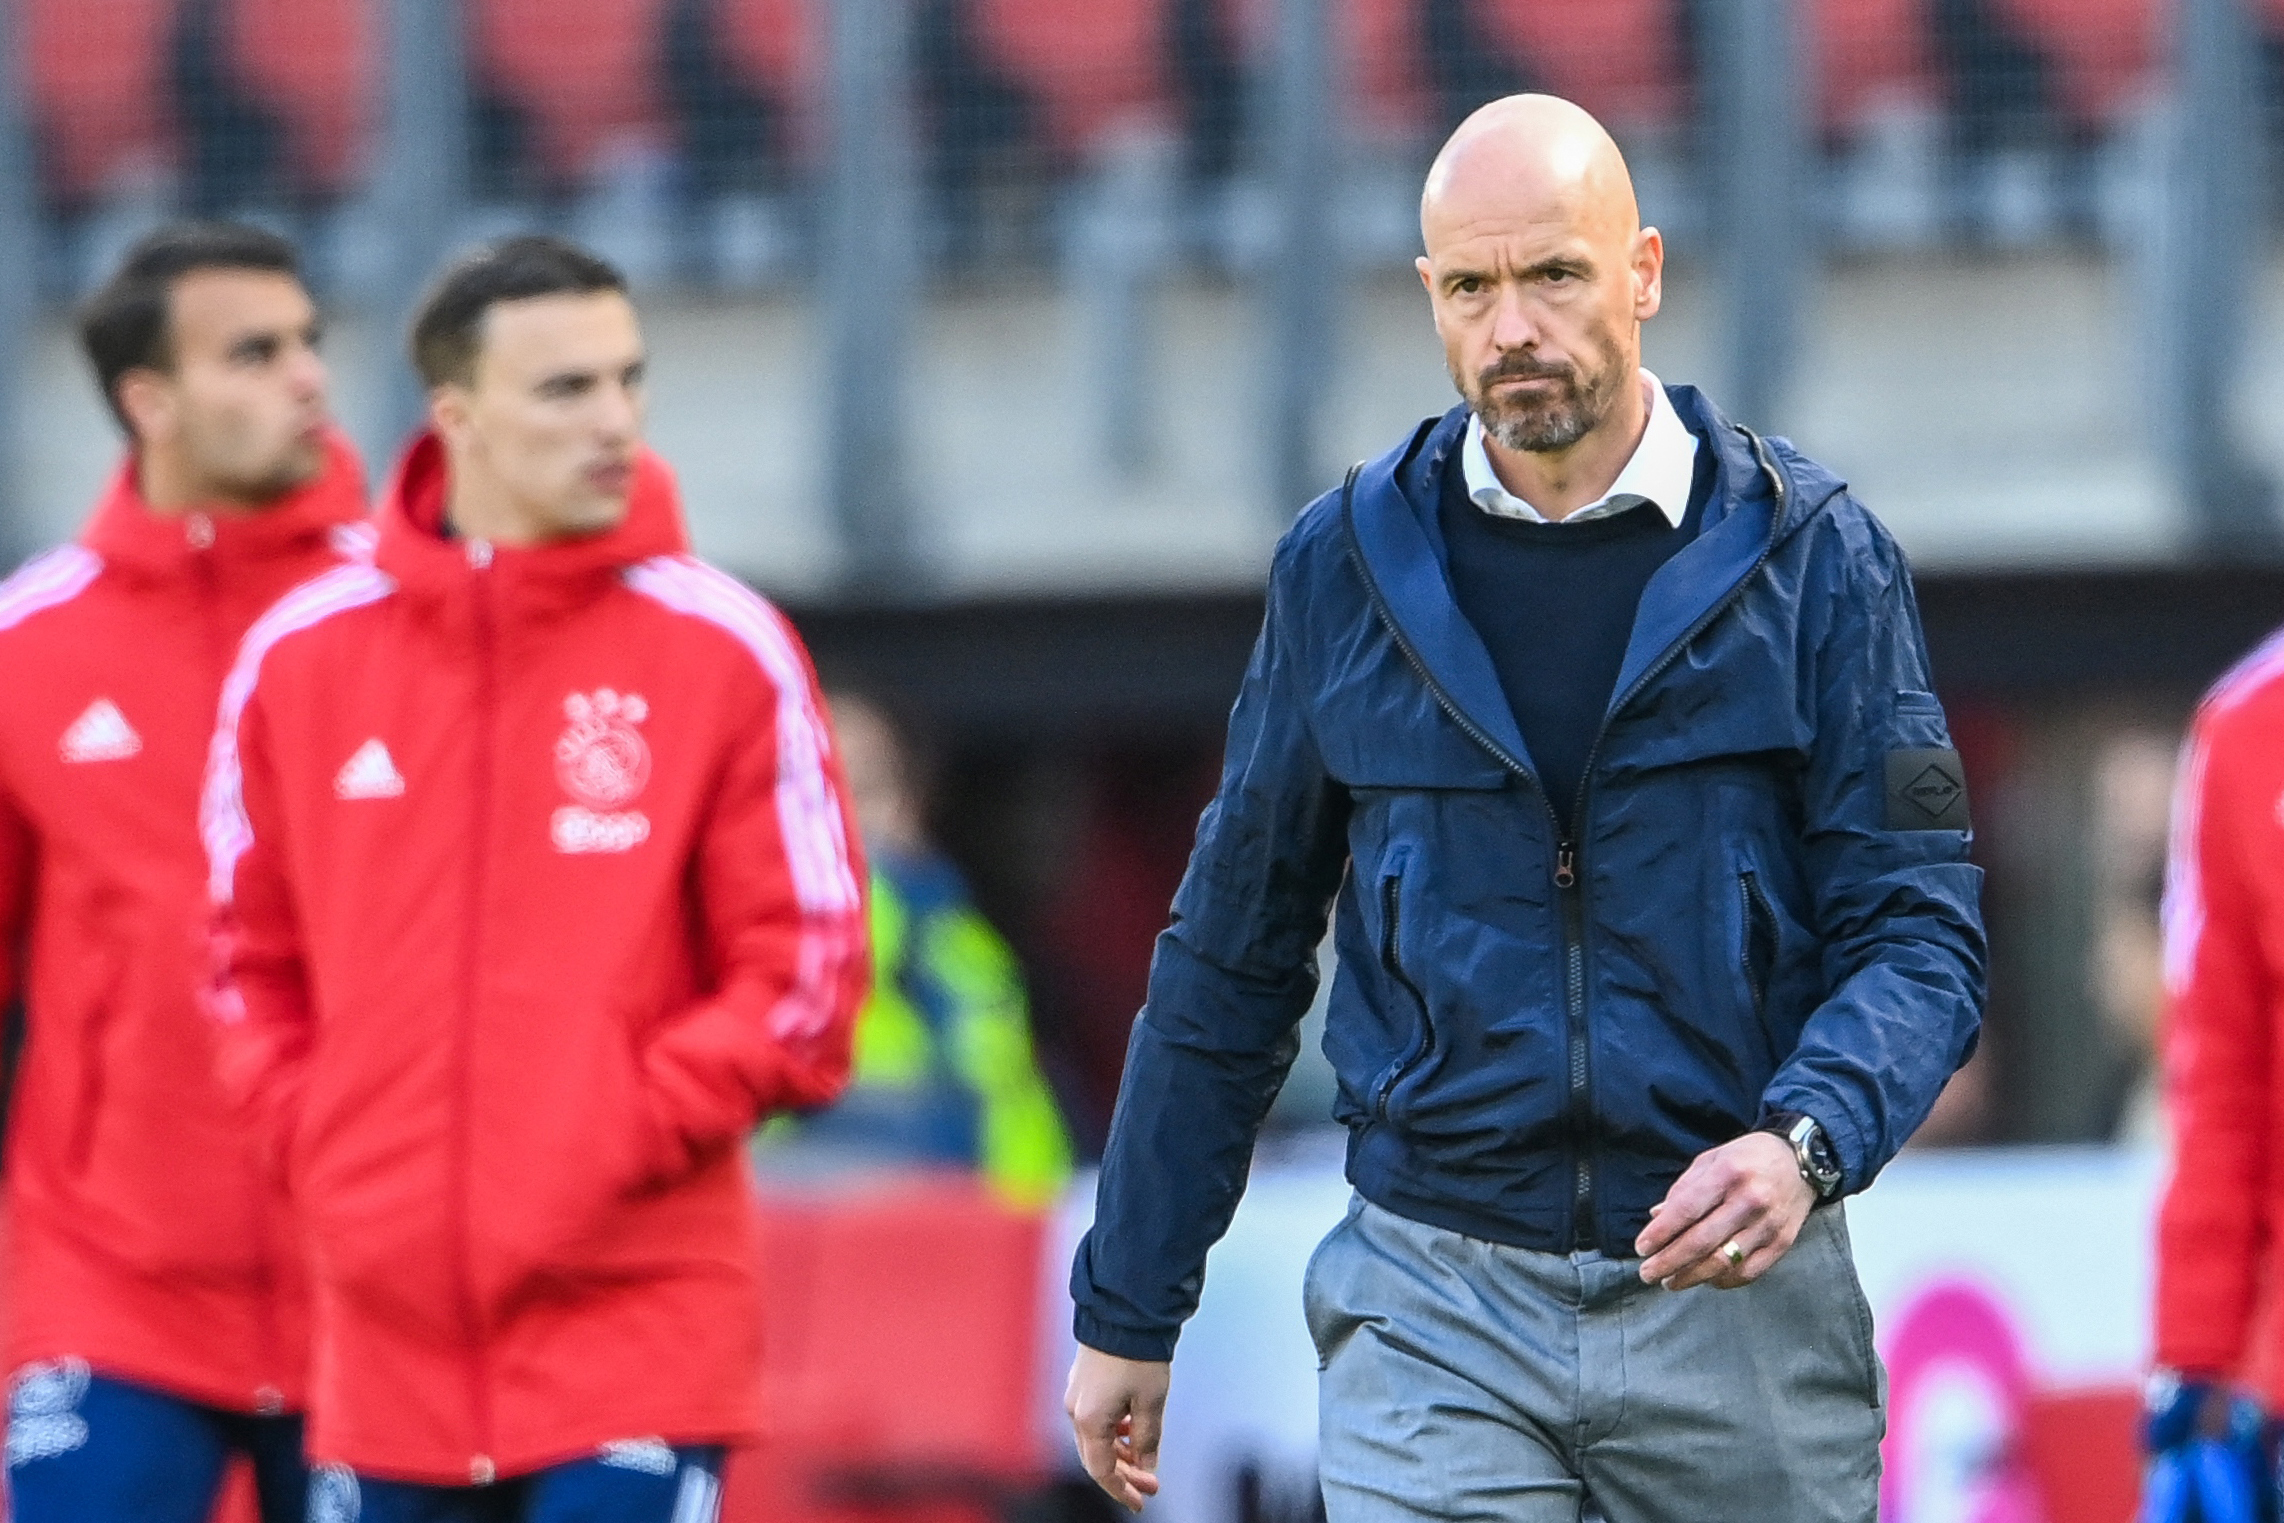  Erik Ten Hag suffered defeat on his managerial debut. (Photo by OLAF KRAAK/ANP/AFP via Getty Images)